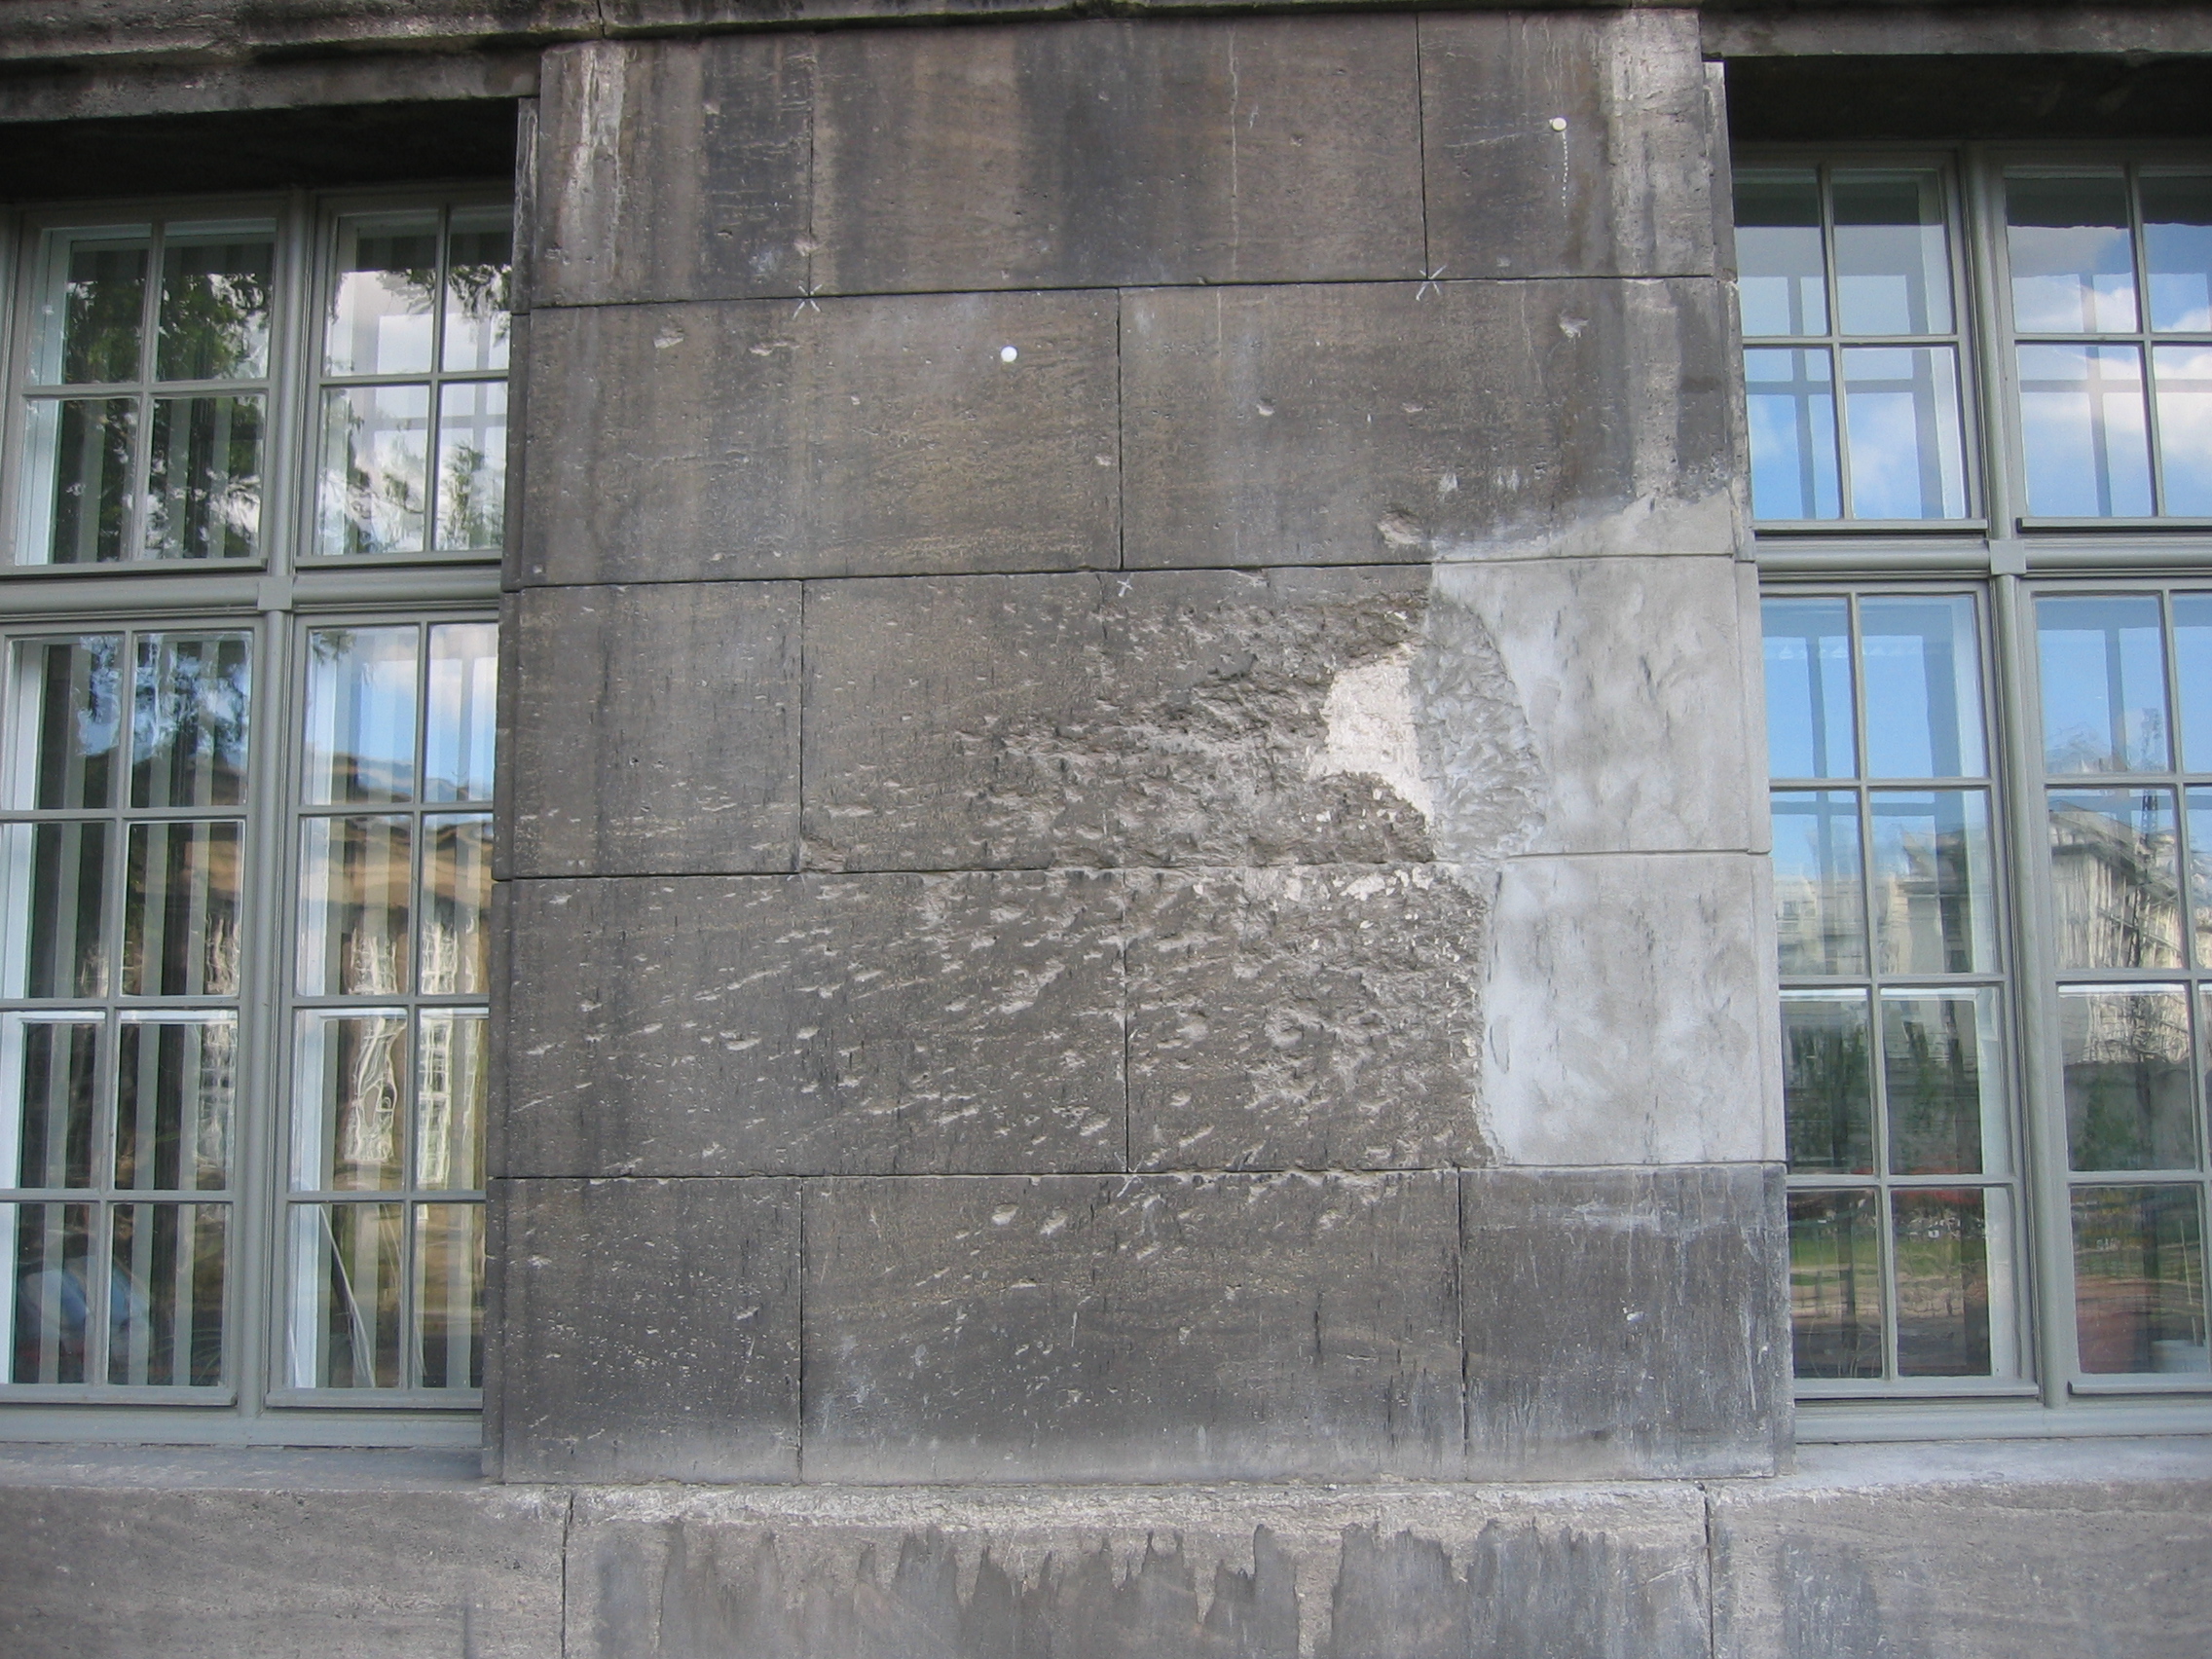 Photograph of the back of the Pergamon Museum Berlin, Germany with tank shell shrapnel spray impact from WW II